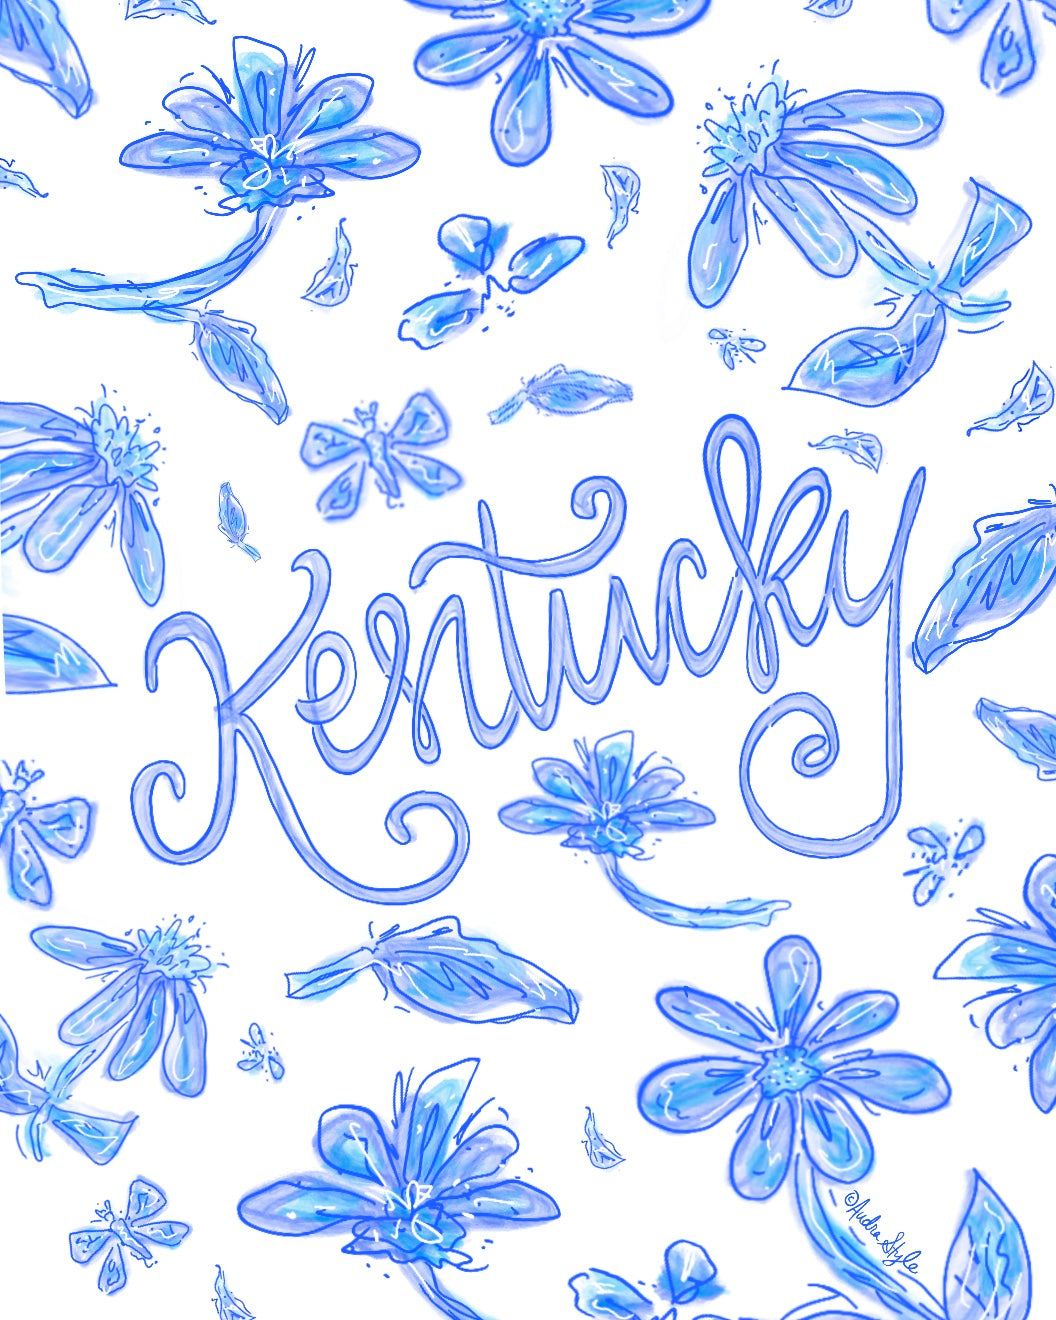 Blue and White Kentucky Floral Reproduction Print